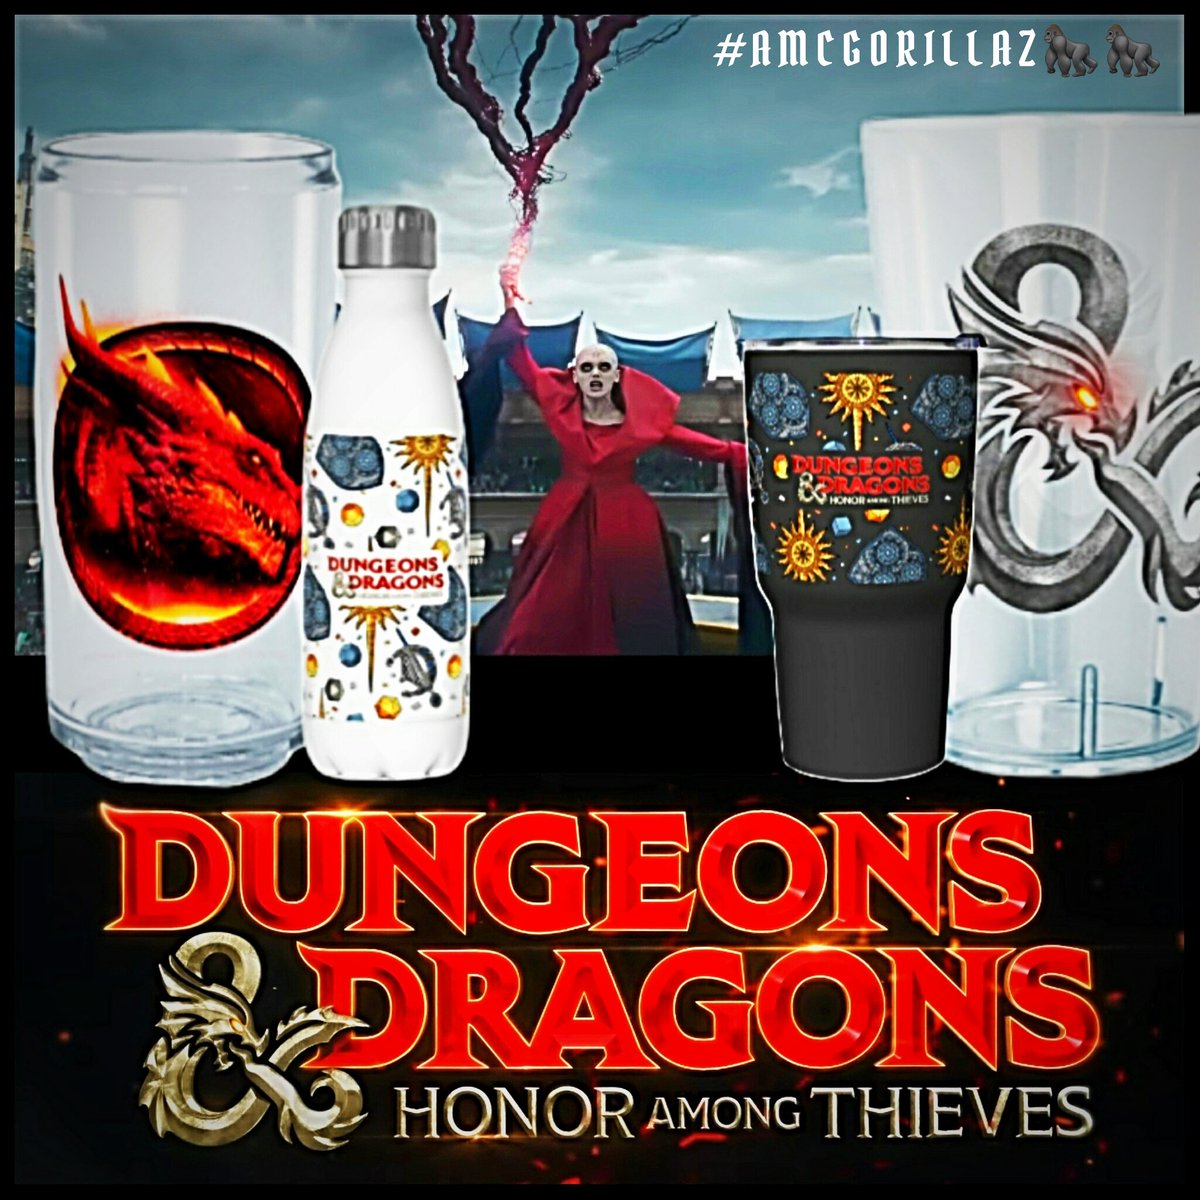 For all the Dungeons & Dragons Fans‼️  #DungeonsAndDragonsMovie Which was a phenomenal Movie whether you were into D&D or not‼️Loved it🍿‼️#AMC has some cool merchandise left!  ❤️ the water bottle! Great gifts for all those summer birthdays! #AMCGORILLAZ